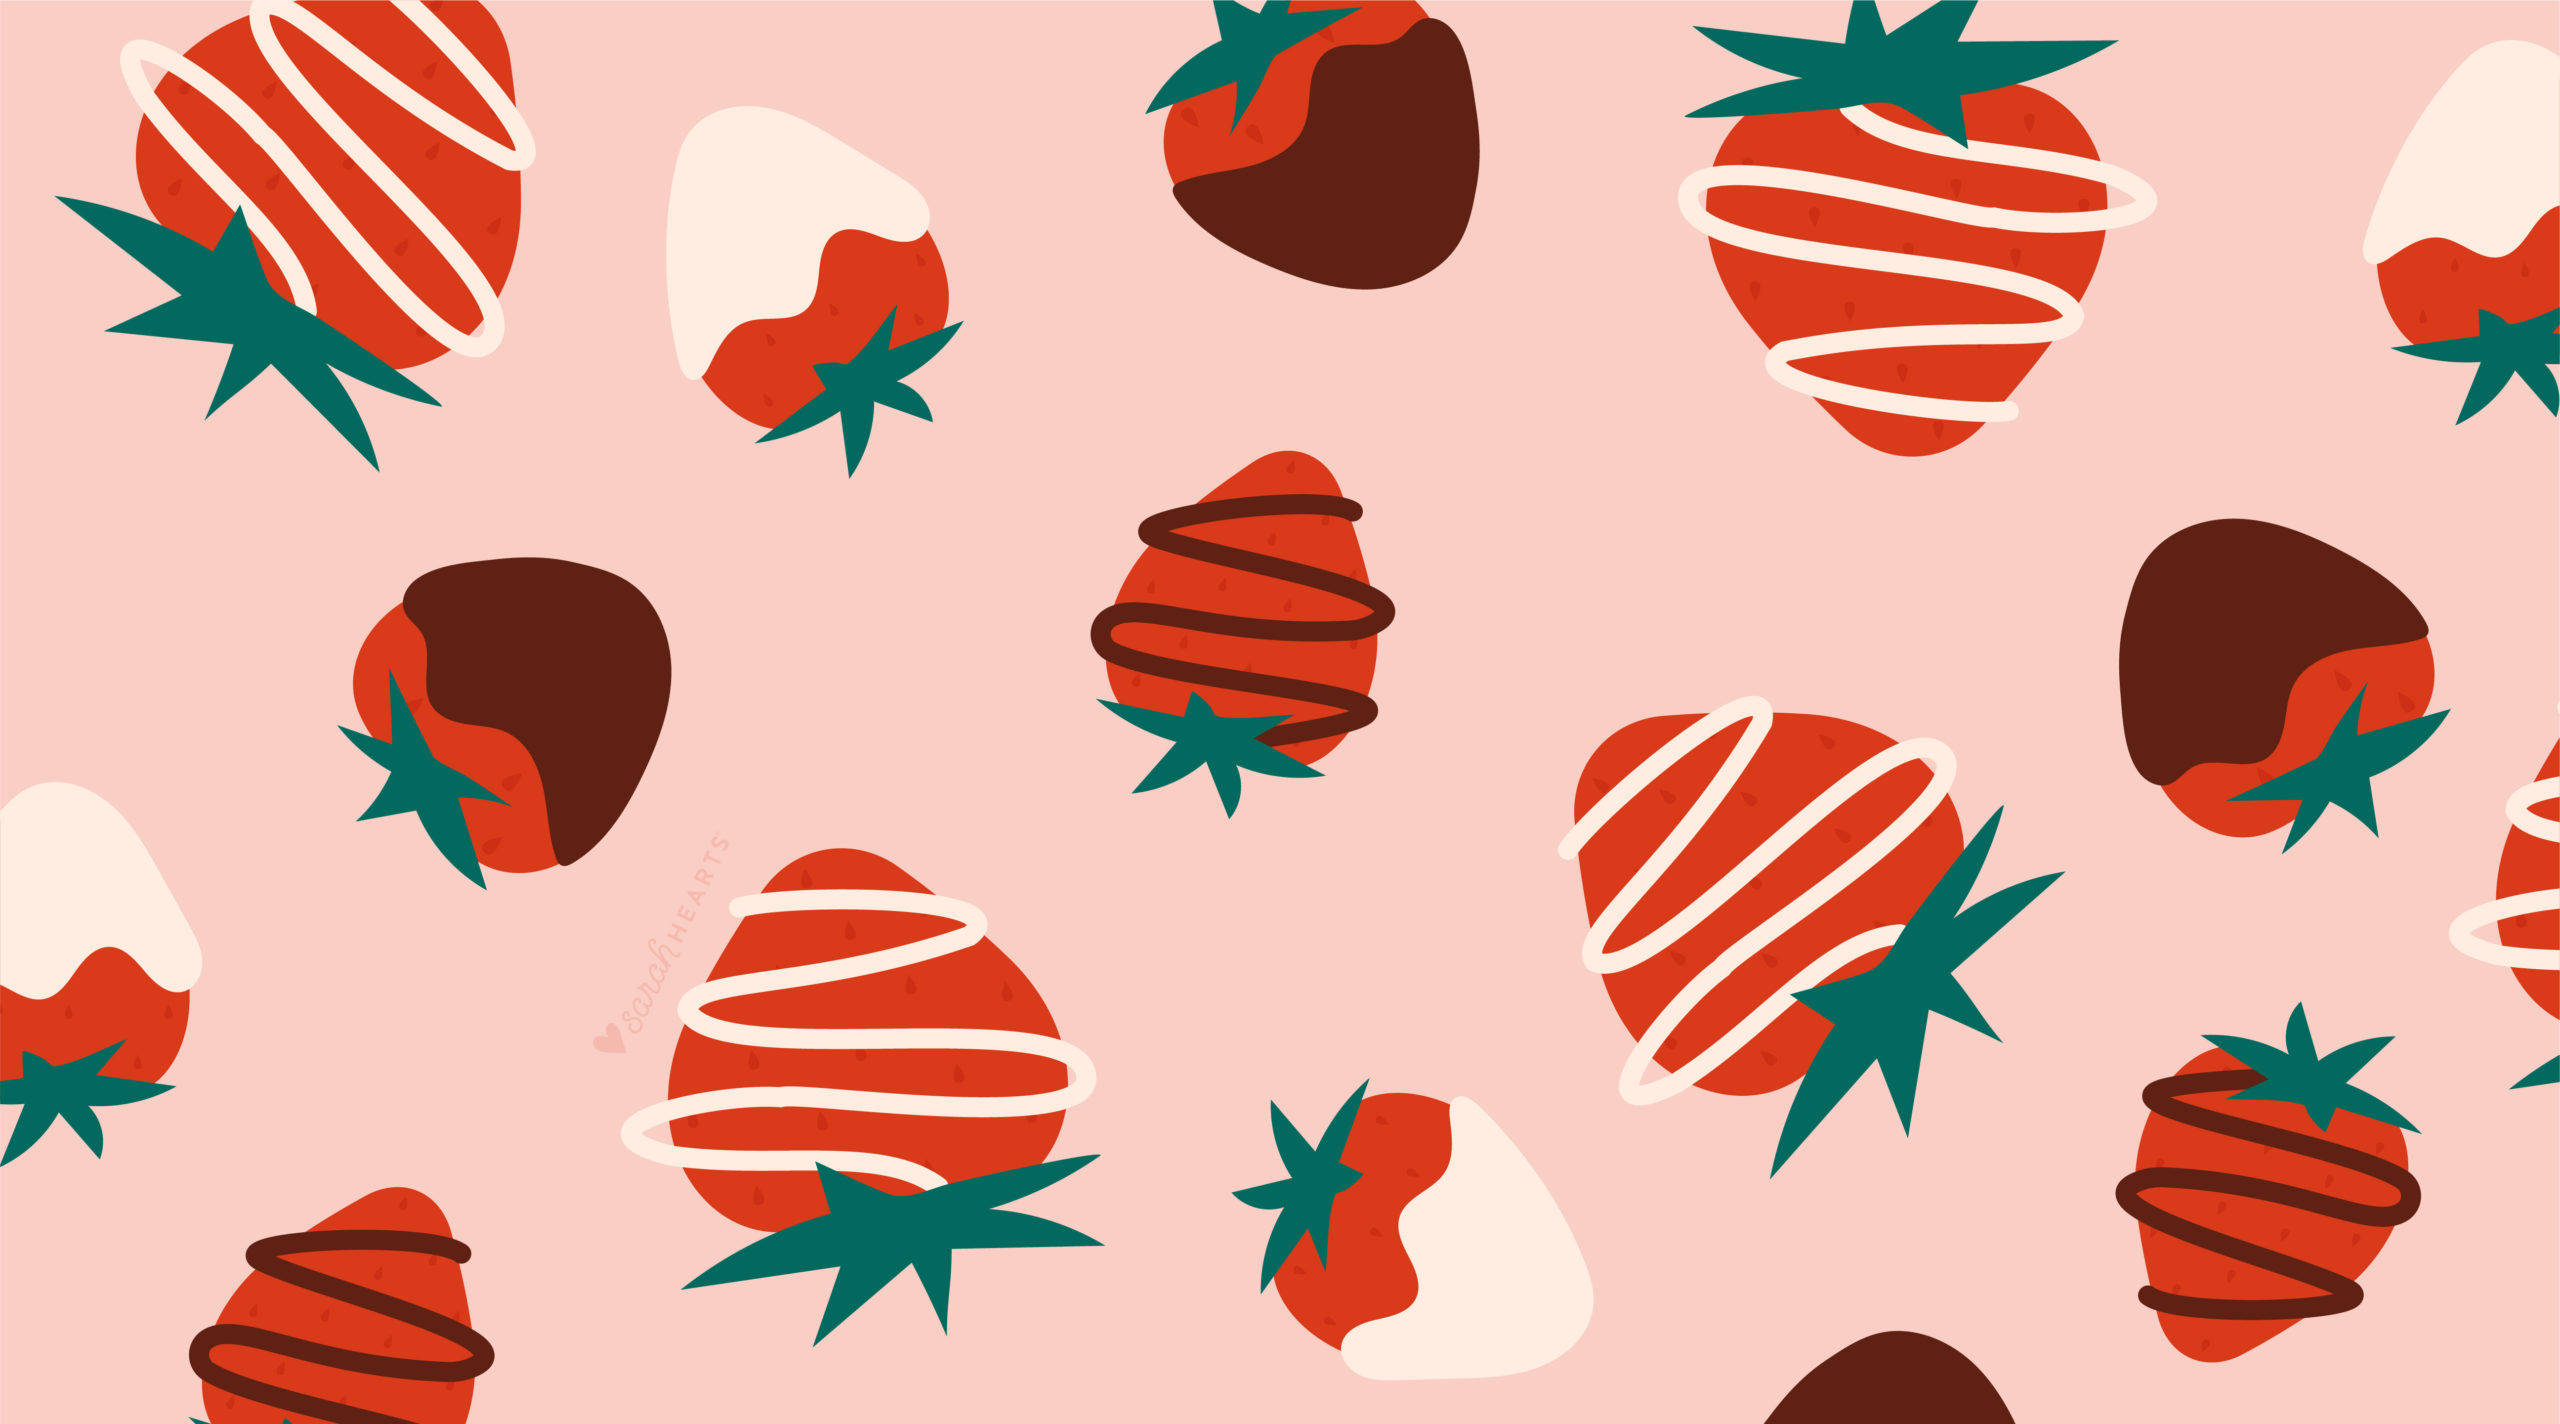 Adorable Chocolate-covered Strawberry Desktop Wallpaper